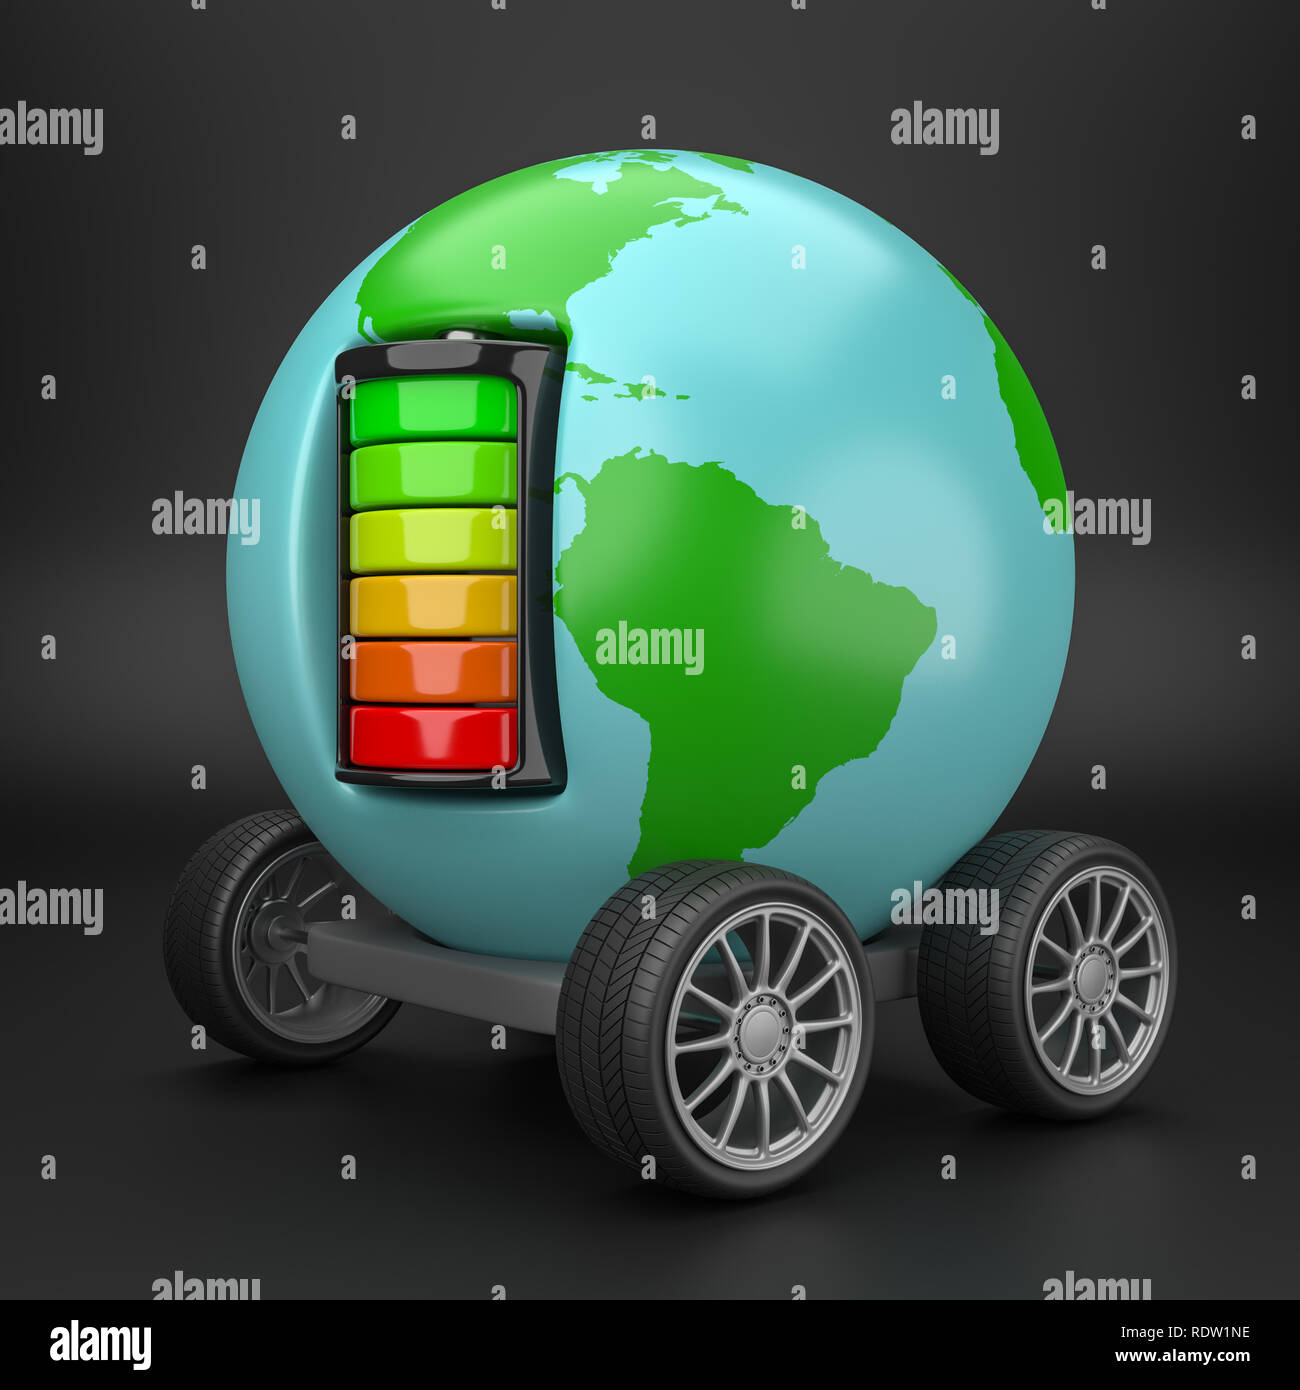 Earth Planet with Wheels Powered by an Electric Battery on Black Background 3D Illustration Stock Photo